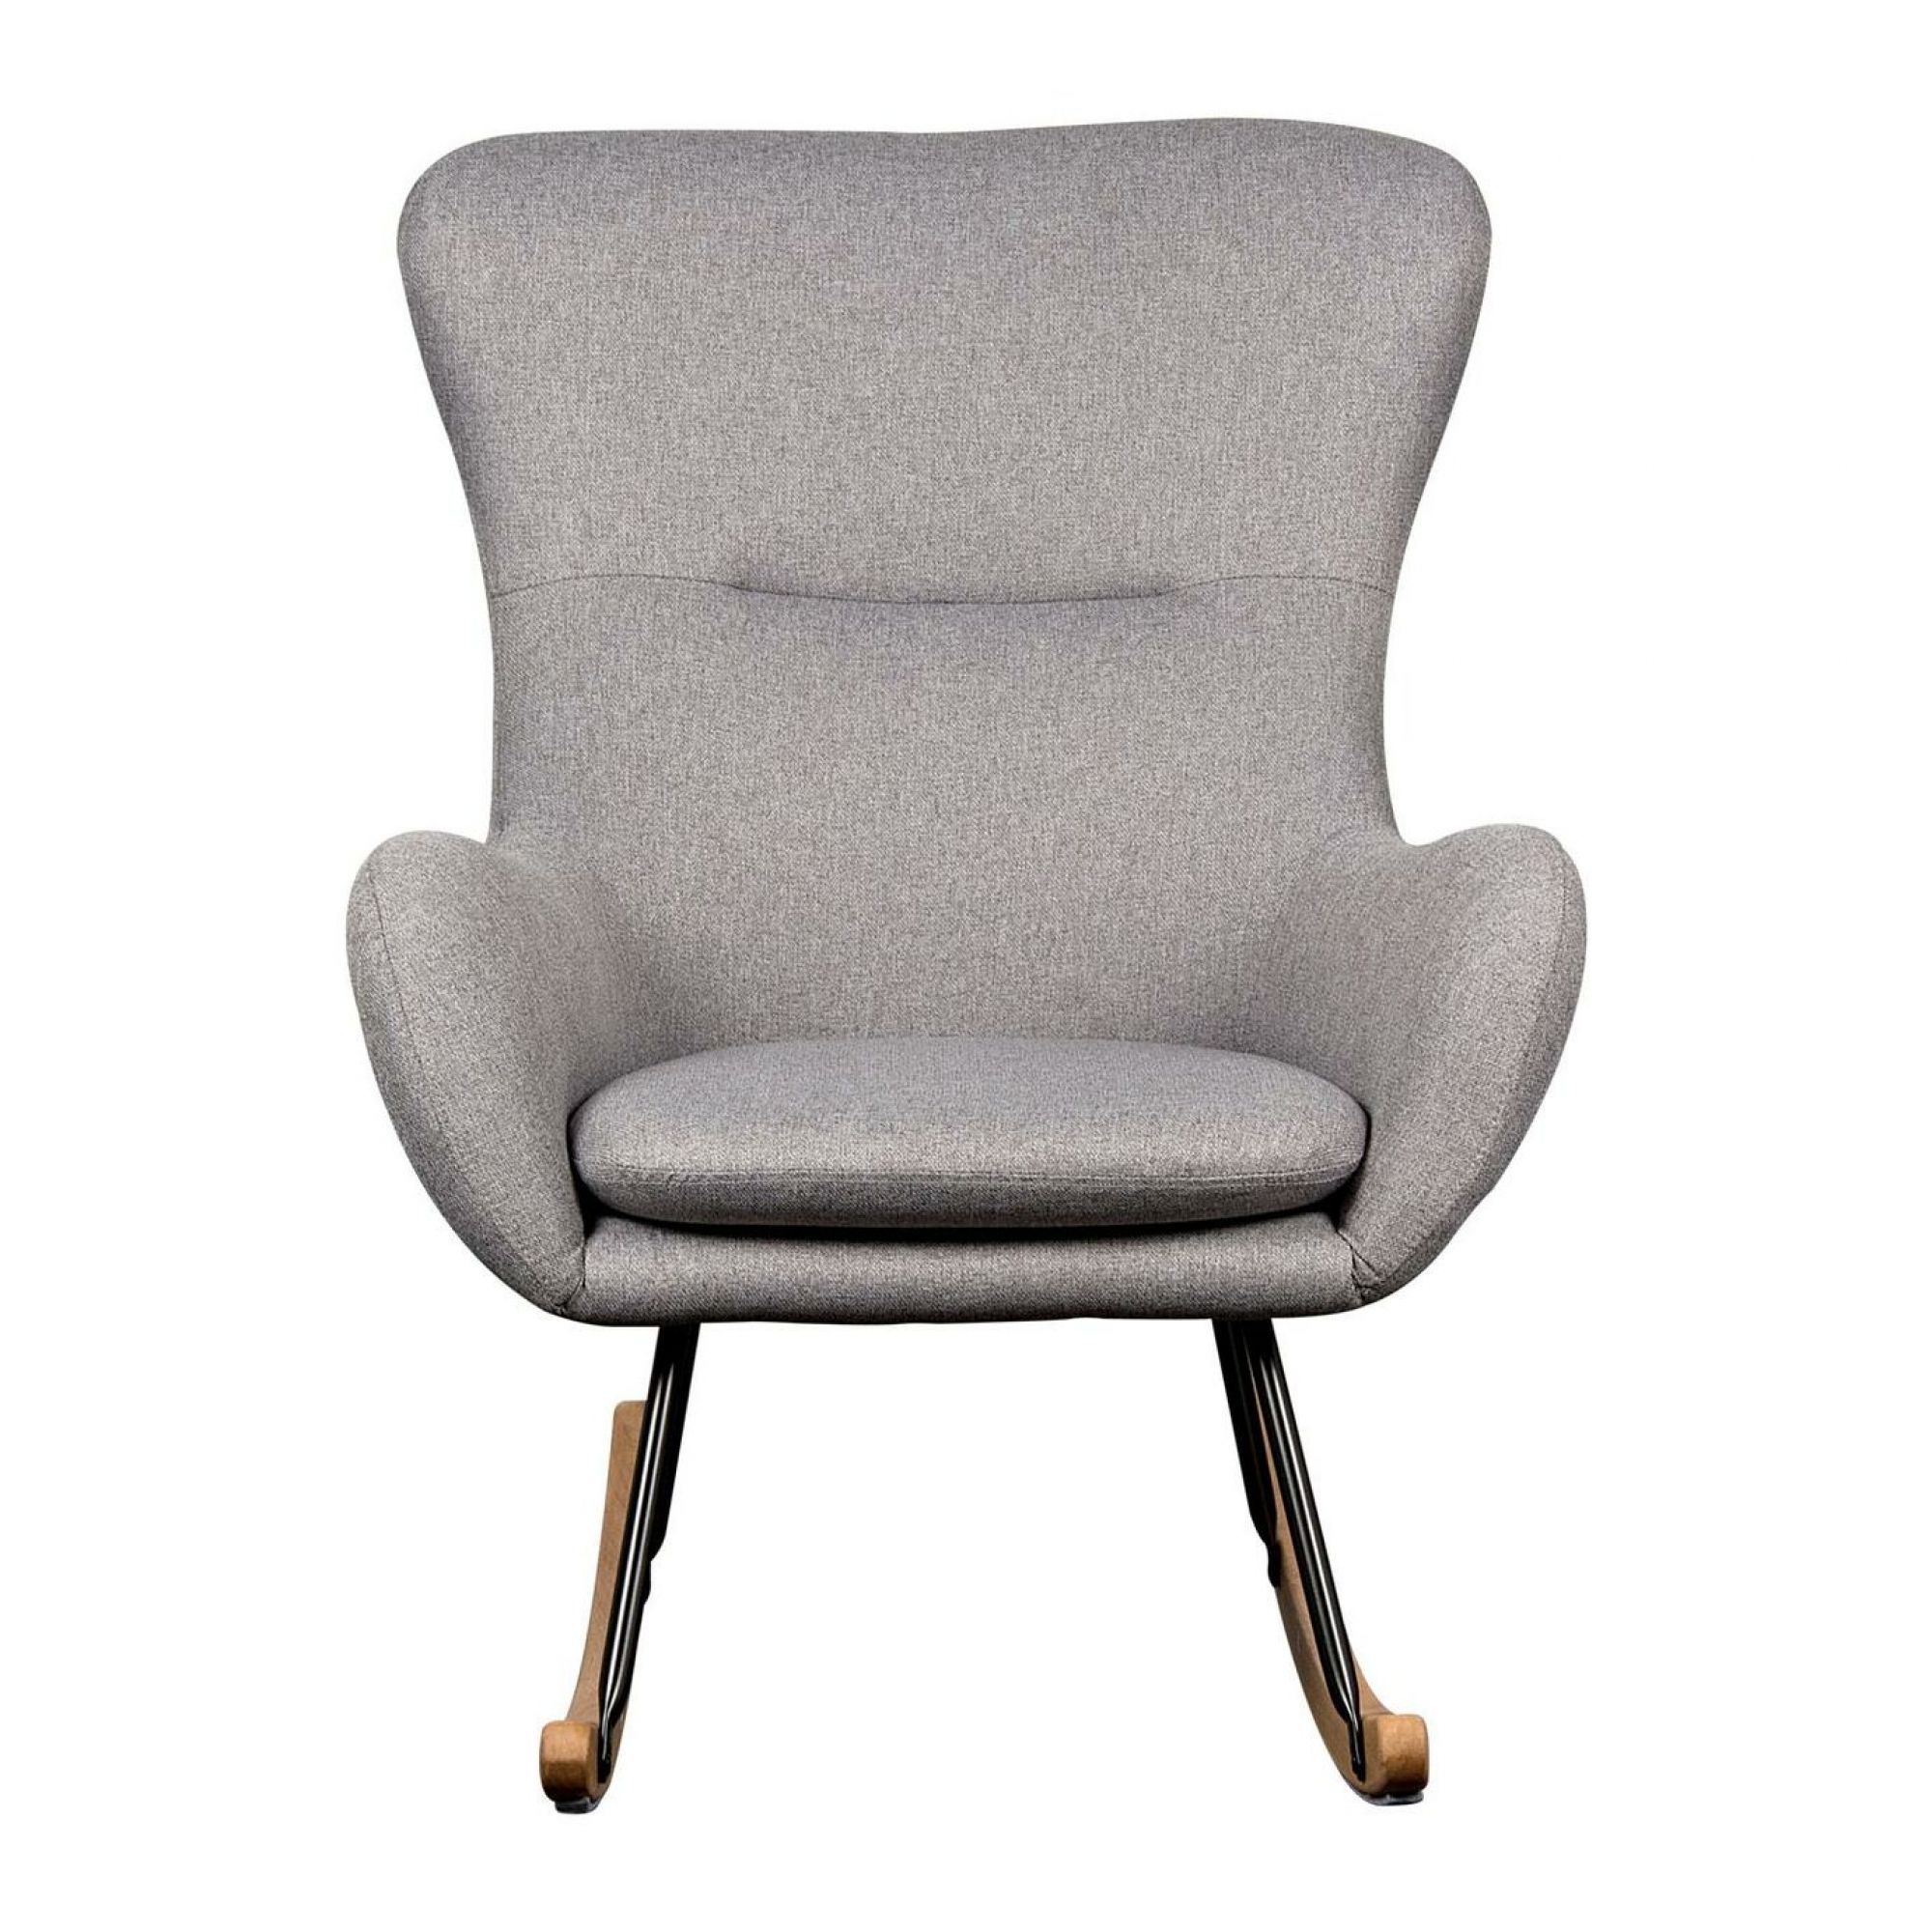 Fauteuil adulte Rocking O Chair Gris sable